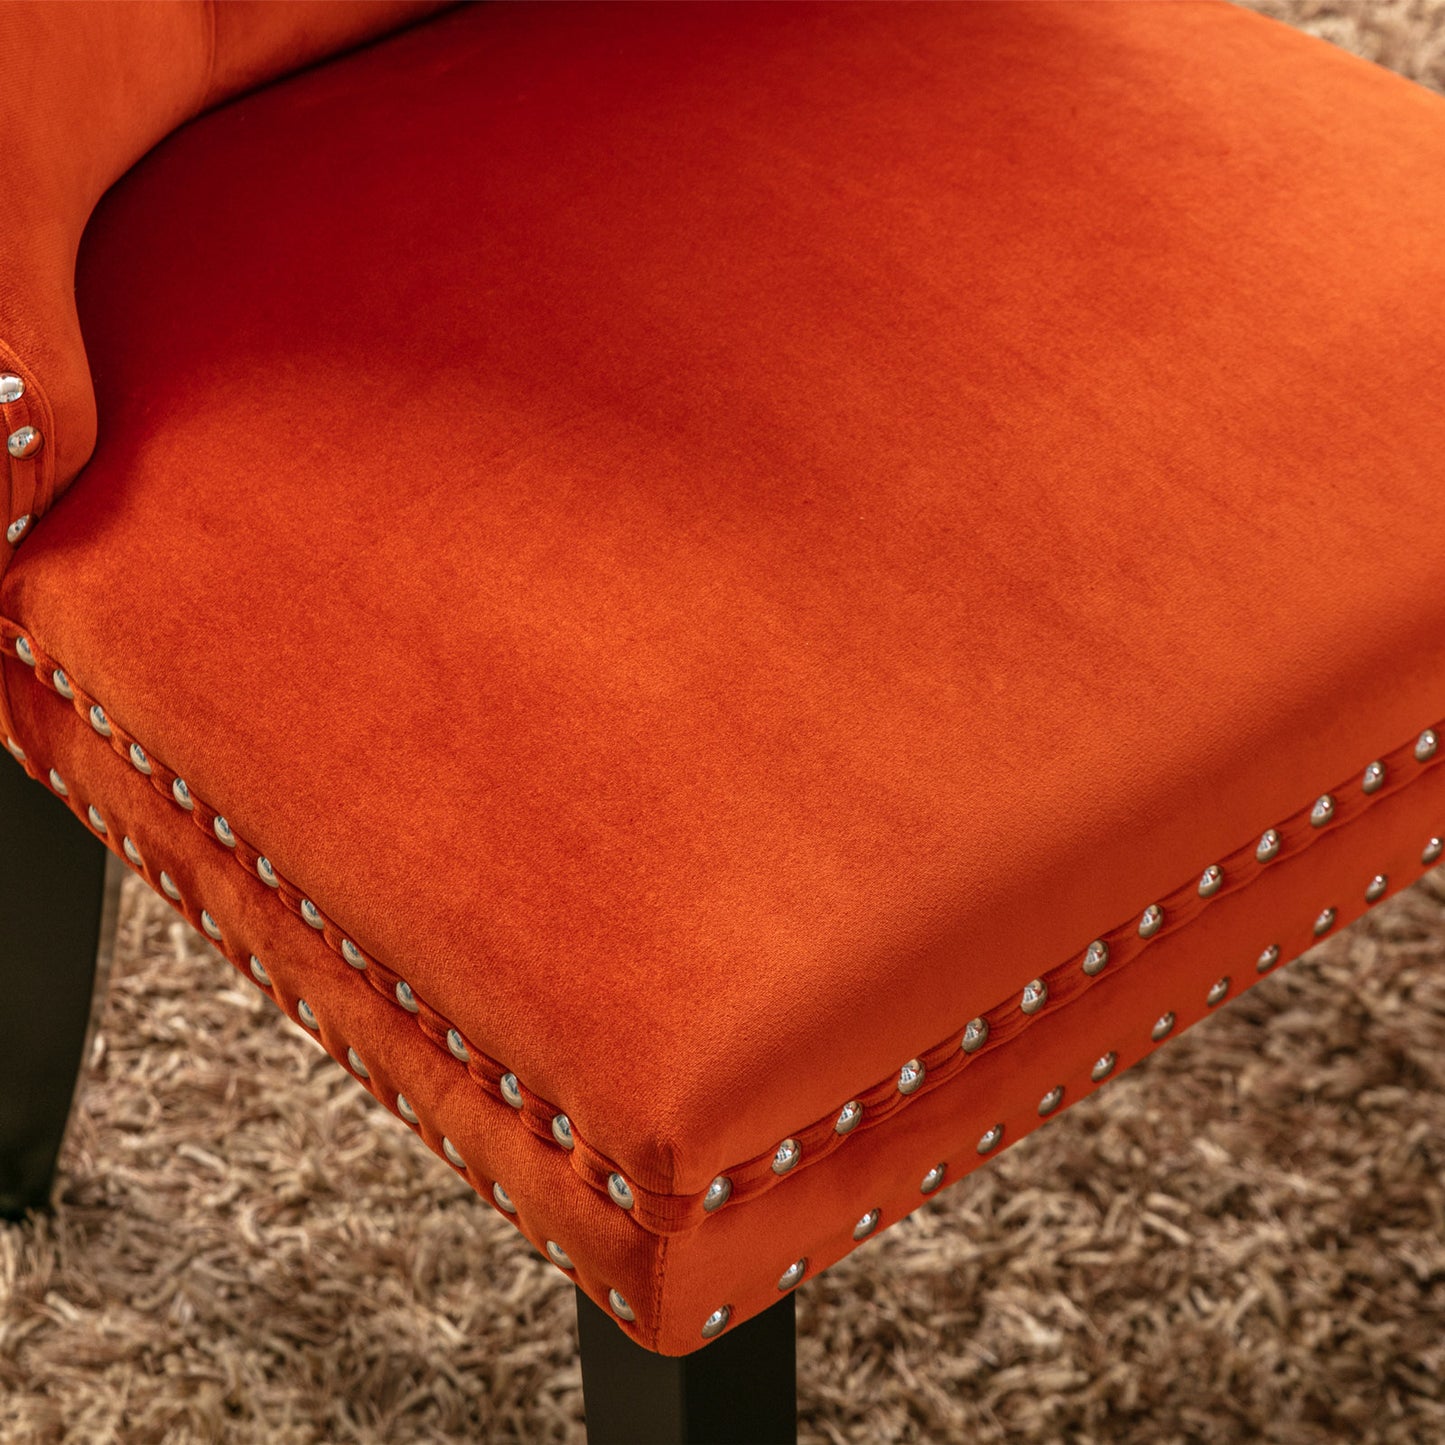 high-end tufted upholstered dining chairs, 2-pcs set orange